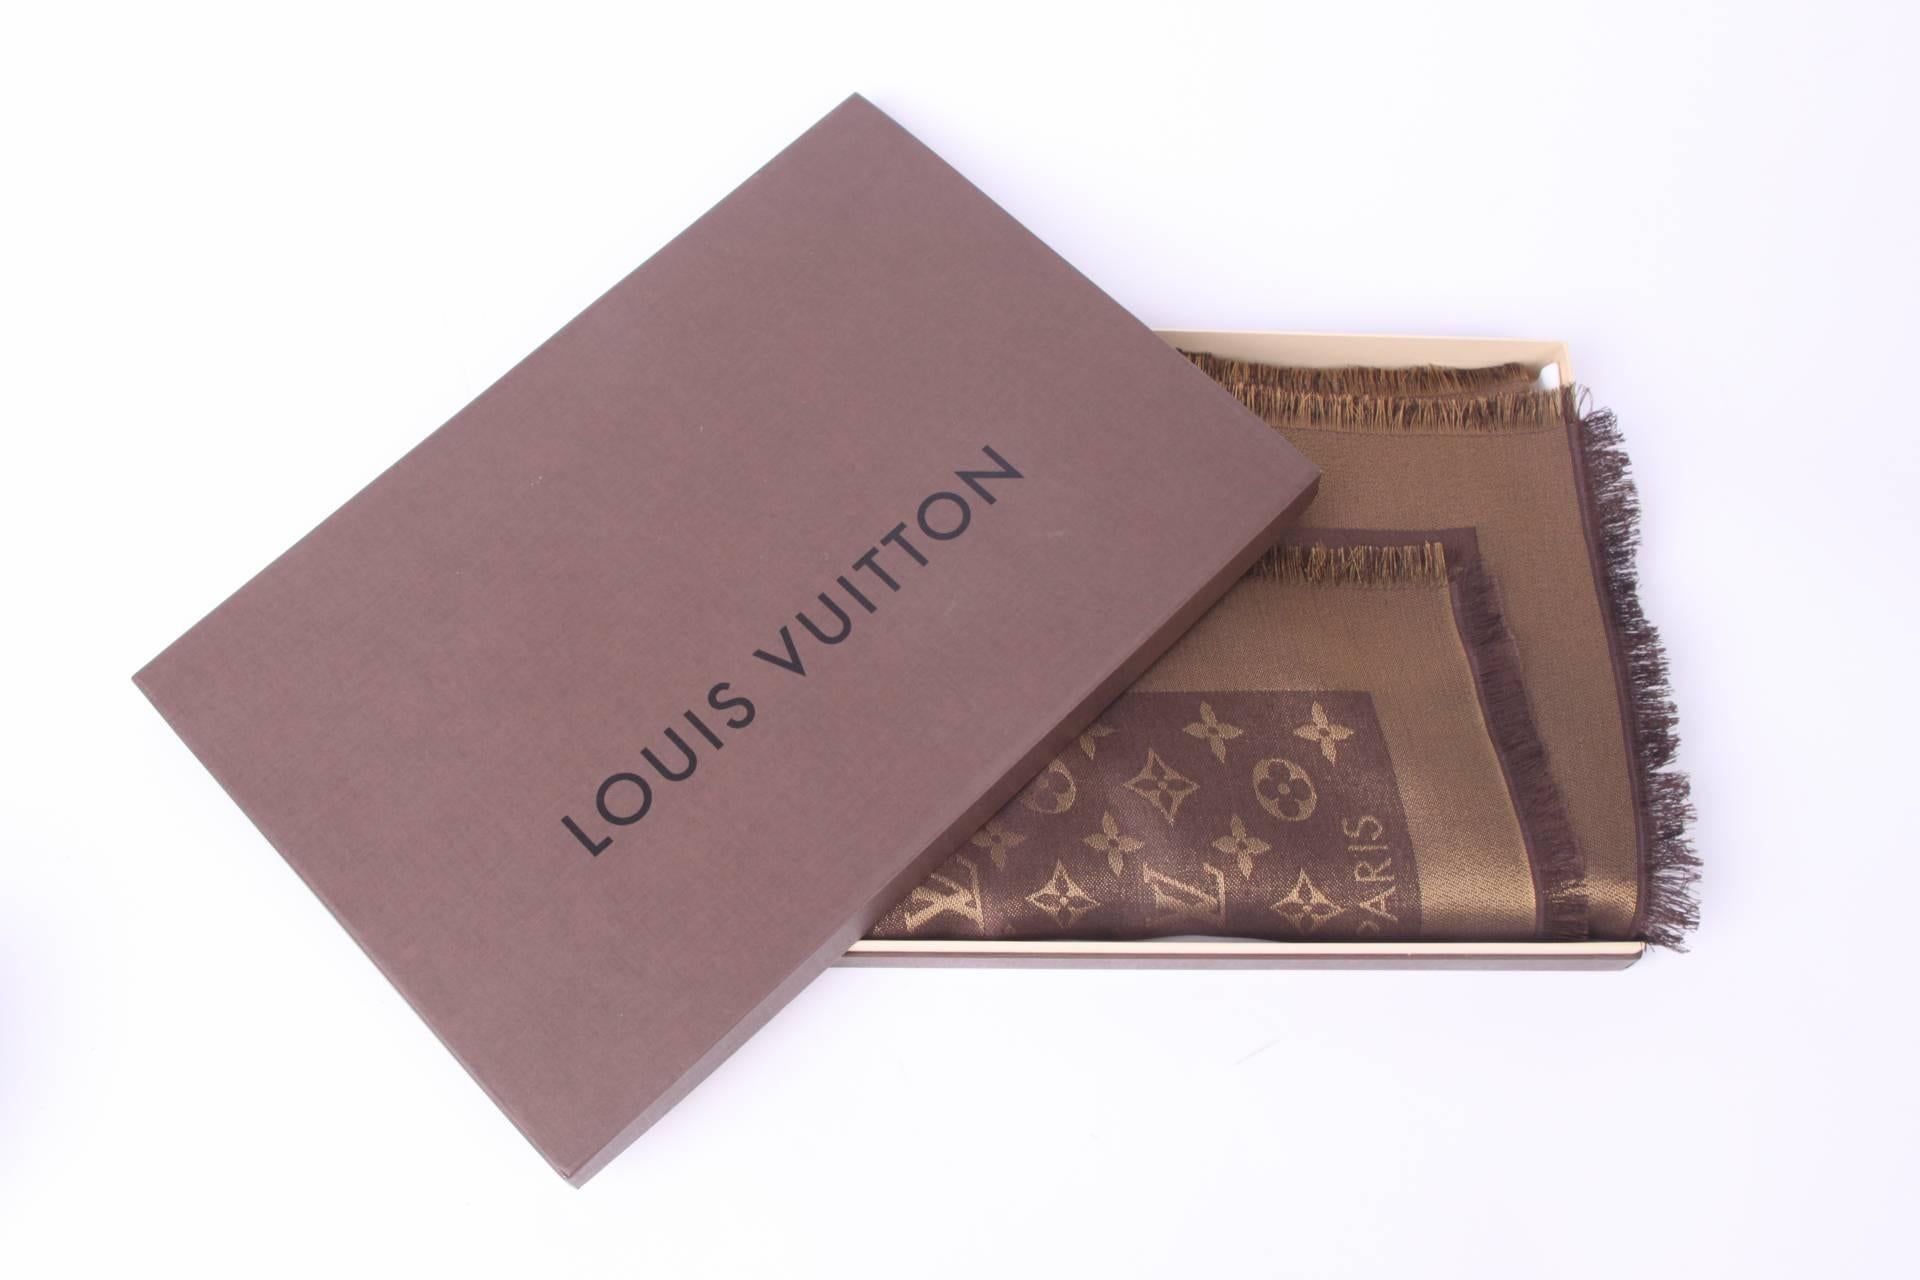 Rather large scarf by Louis Vuitton in dark brown and gold. 

This shawl measures as much as 140 x 140 centimeter and is covered with Louis Vuitton Monograms. Very sophisticated design, the golden part has a subtle shine. Fringe trimming.

New and